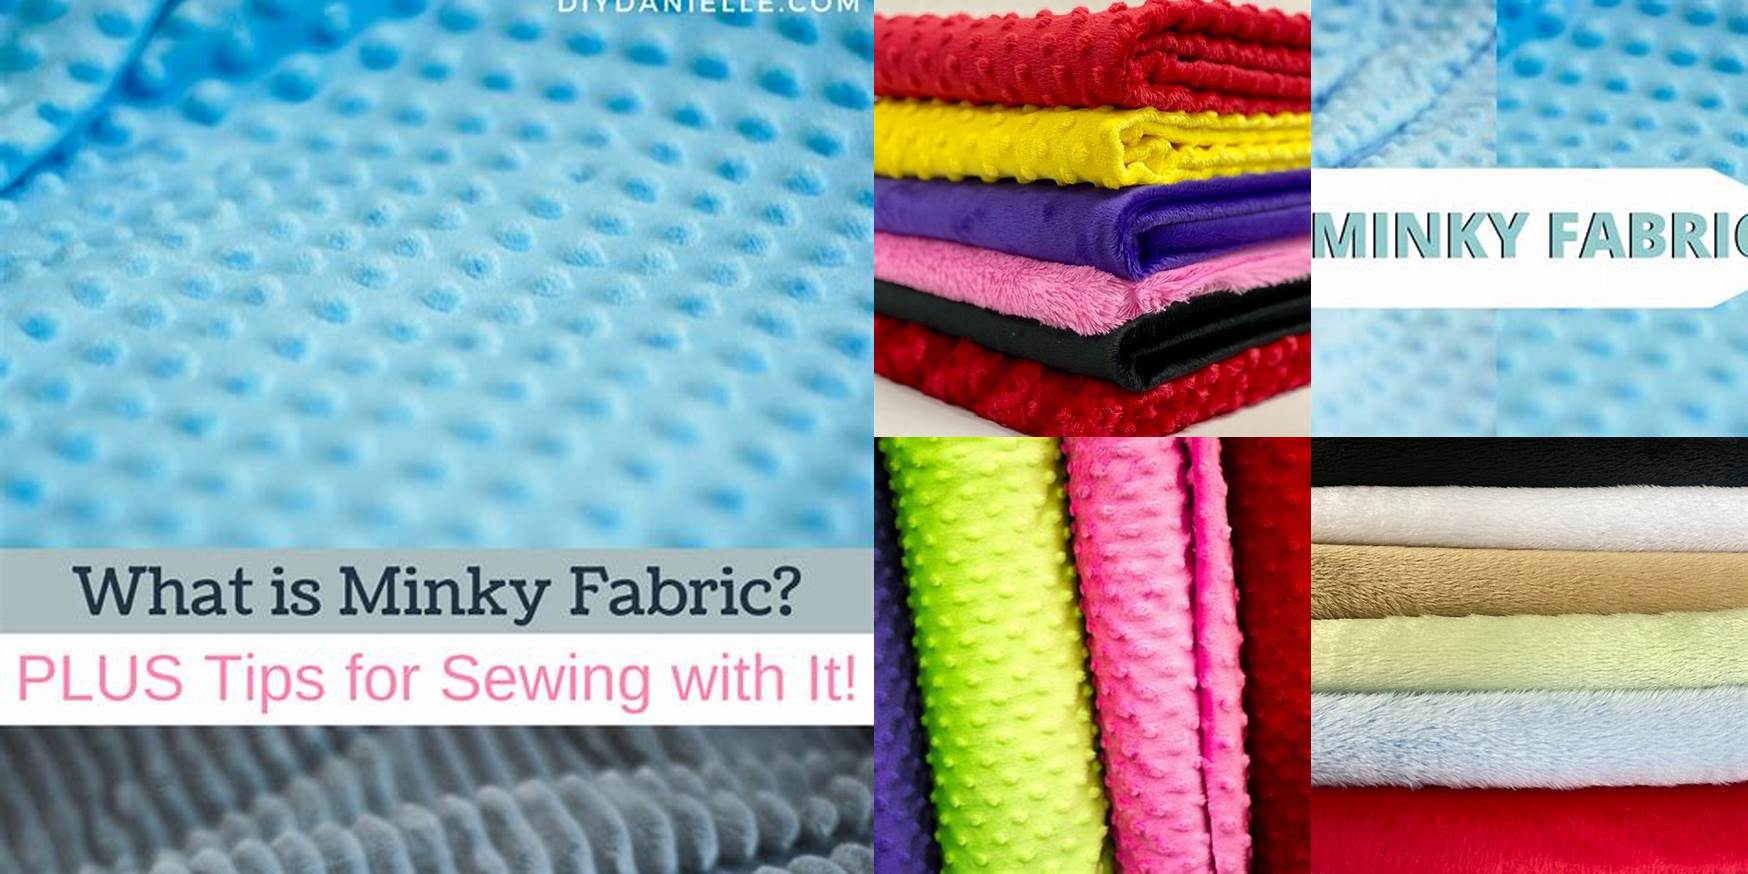 What Does Minky Fabric Mean